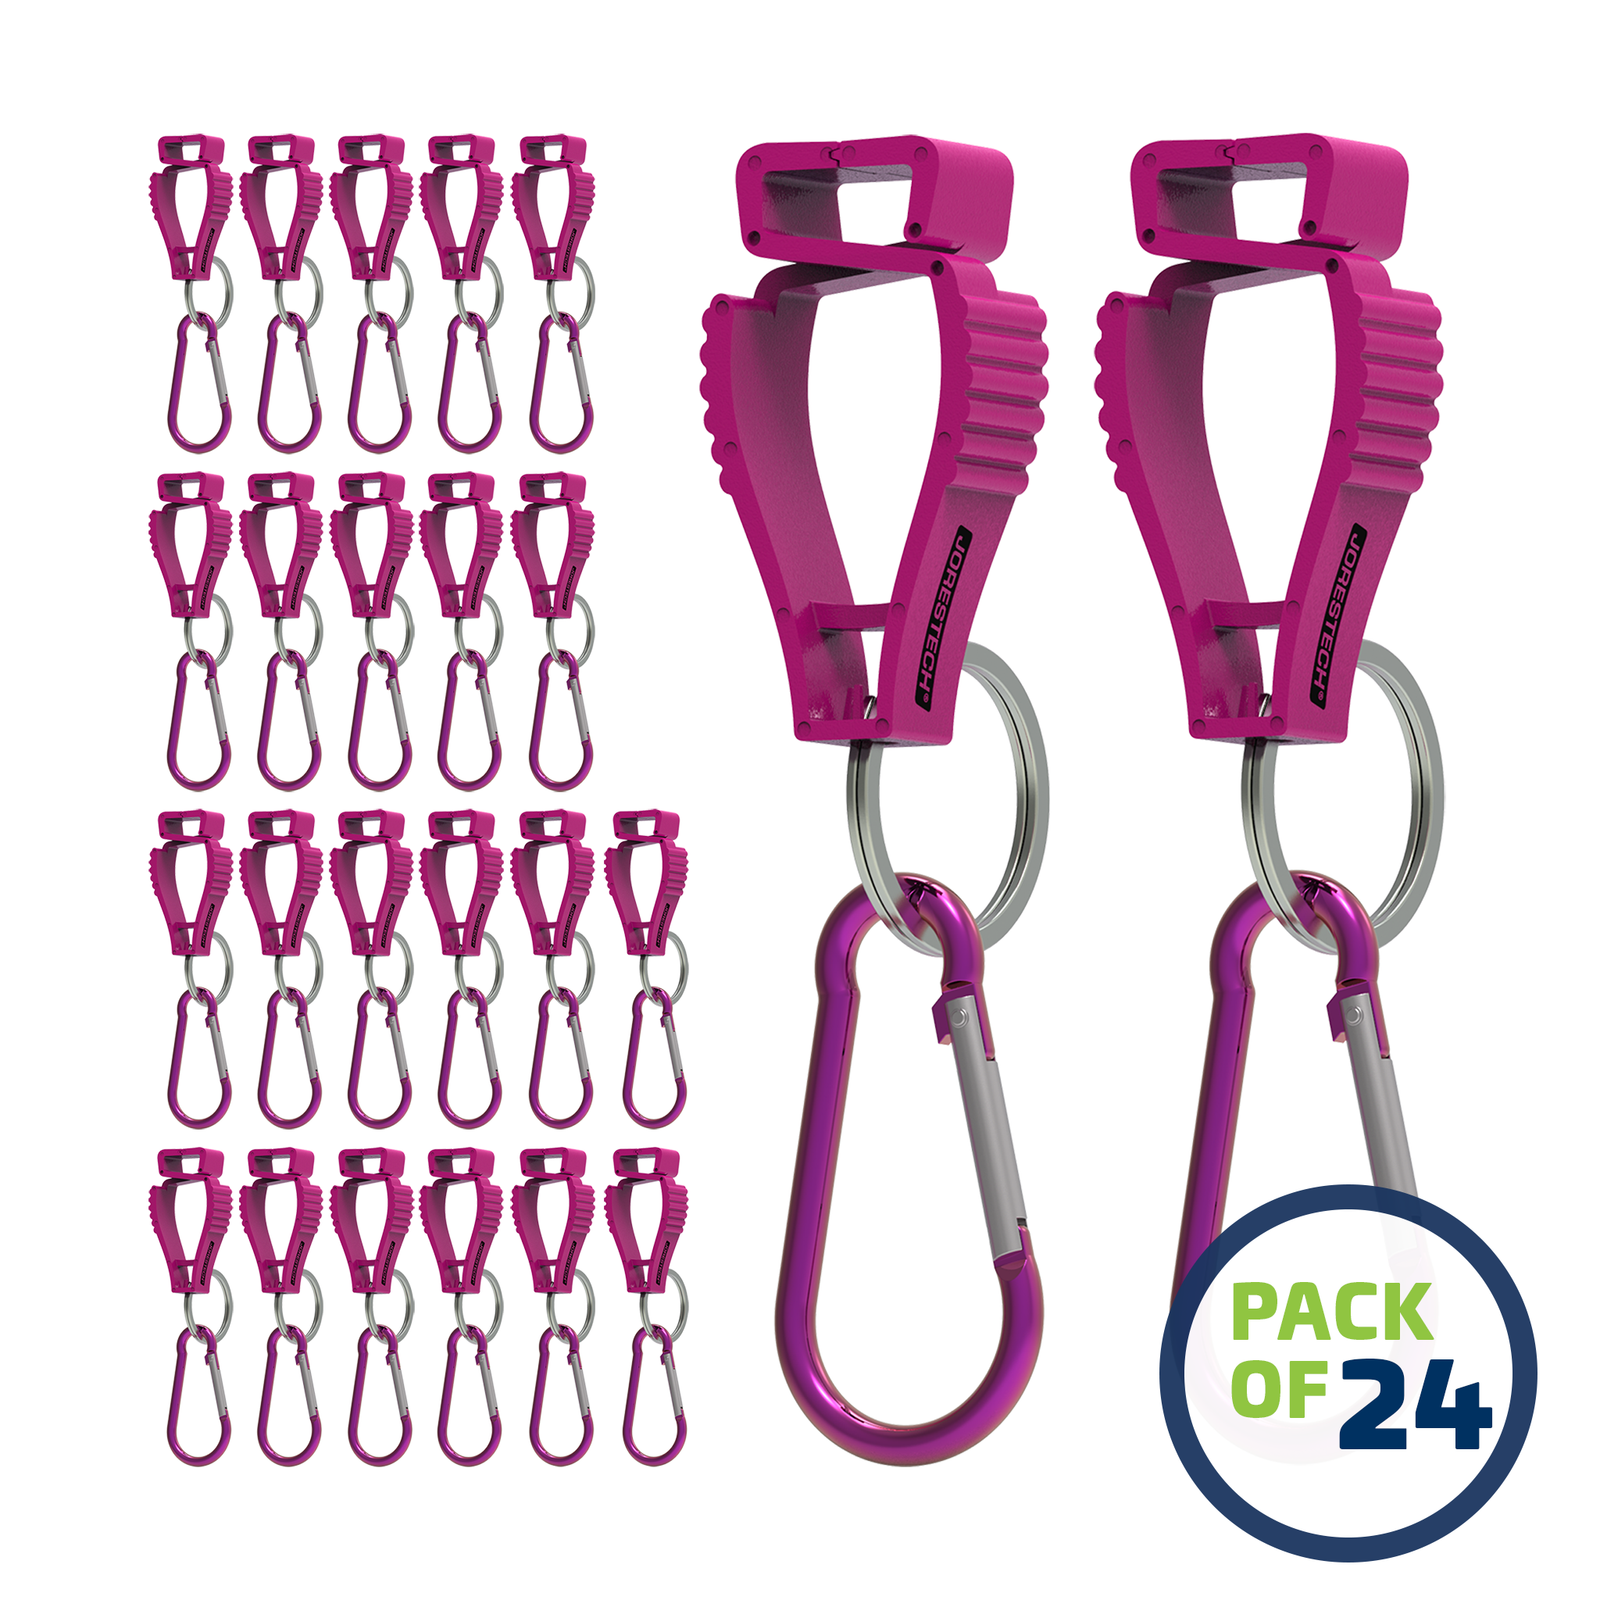 Pack of 24 Pink JORESTECH glove clip safety holders with carabiner